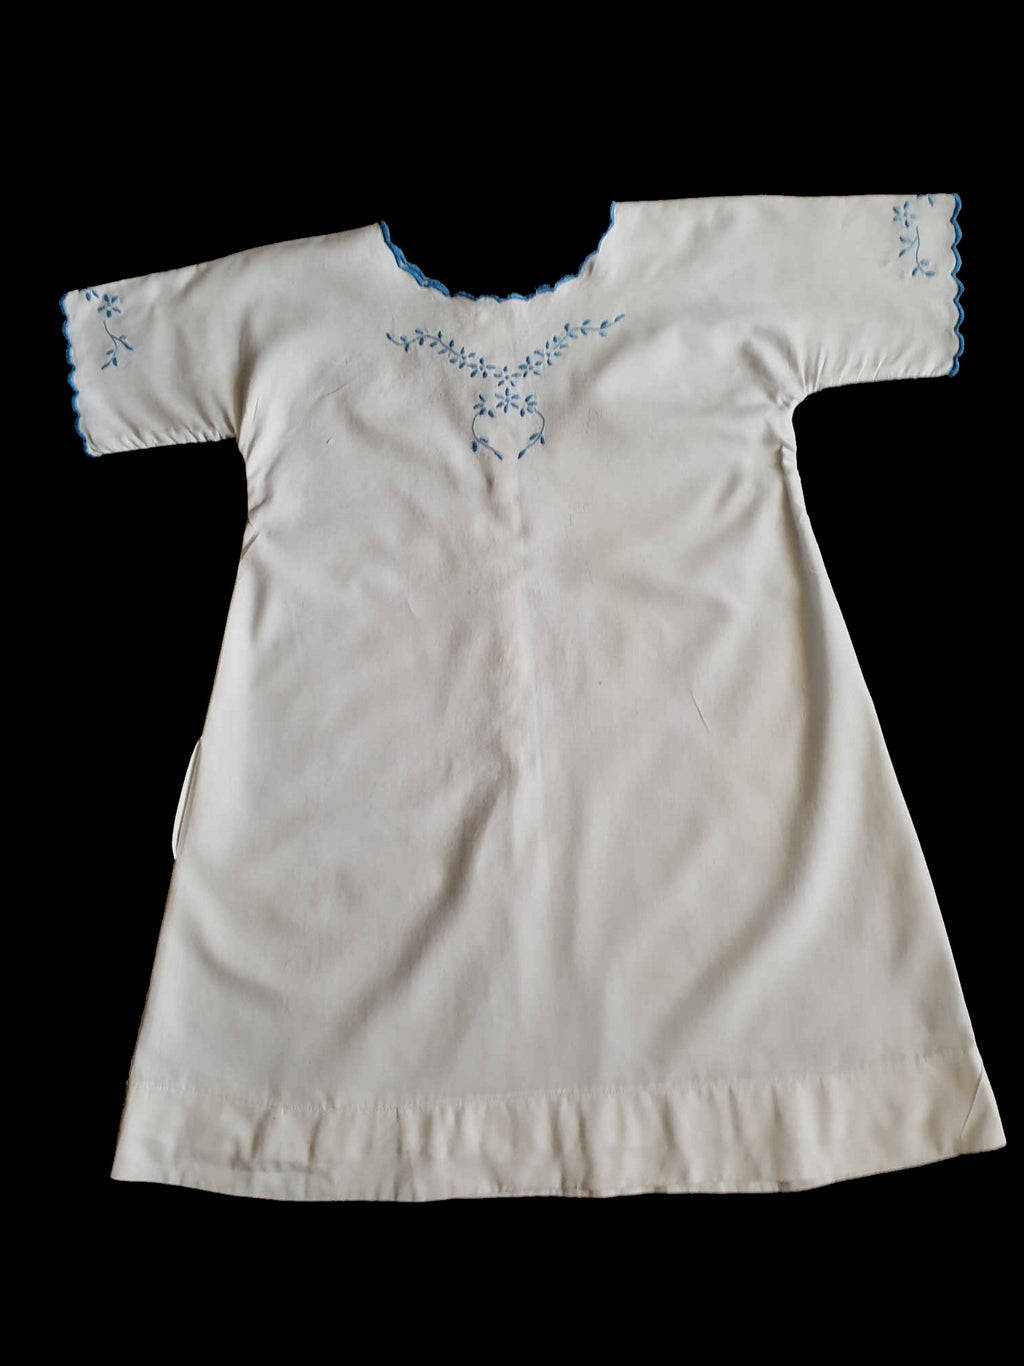 antique 1920s girls dress linen with blue embroidery size 6